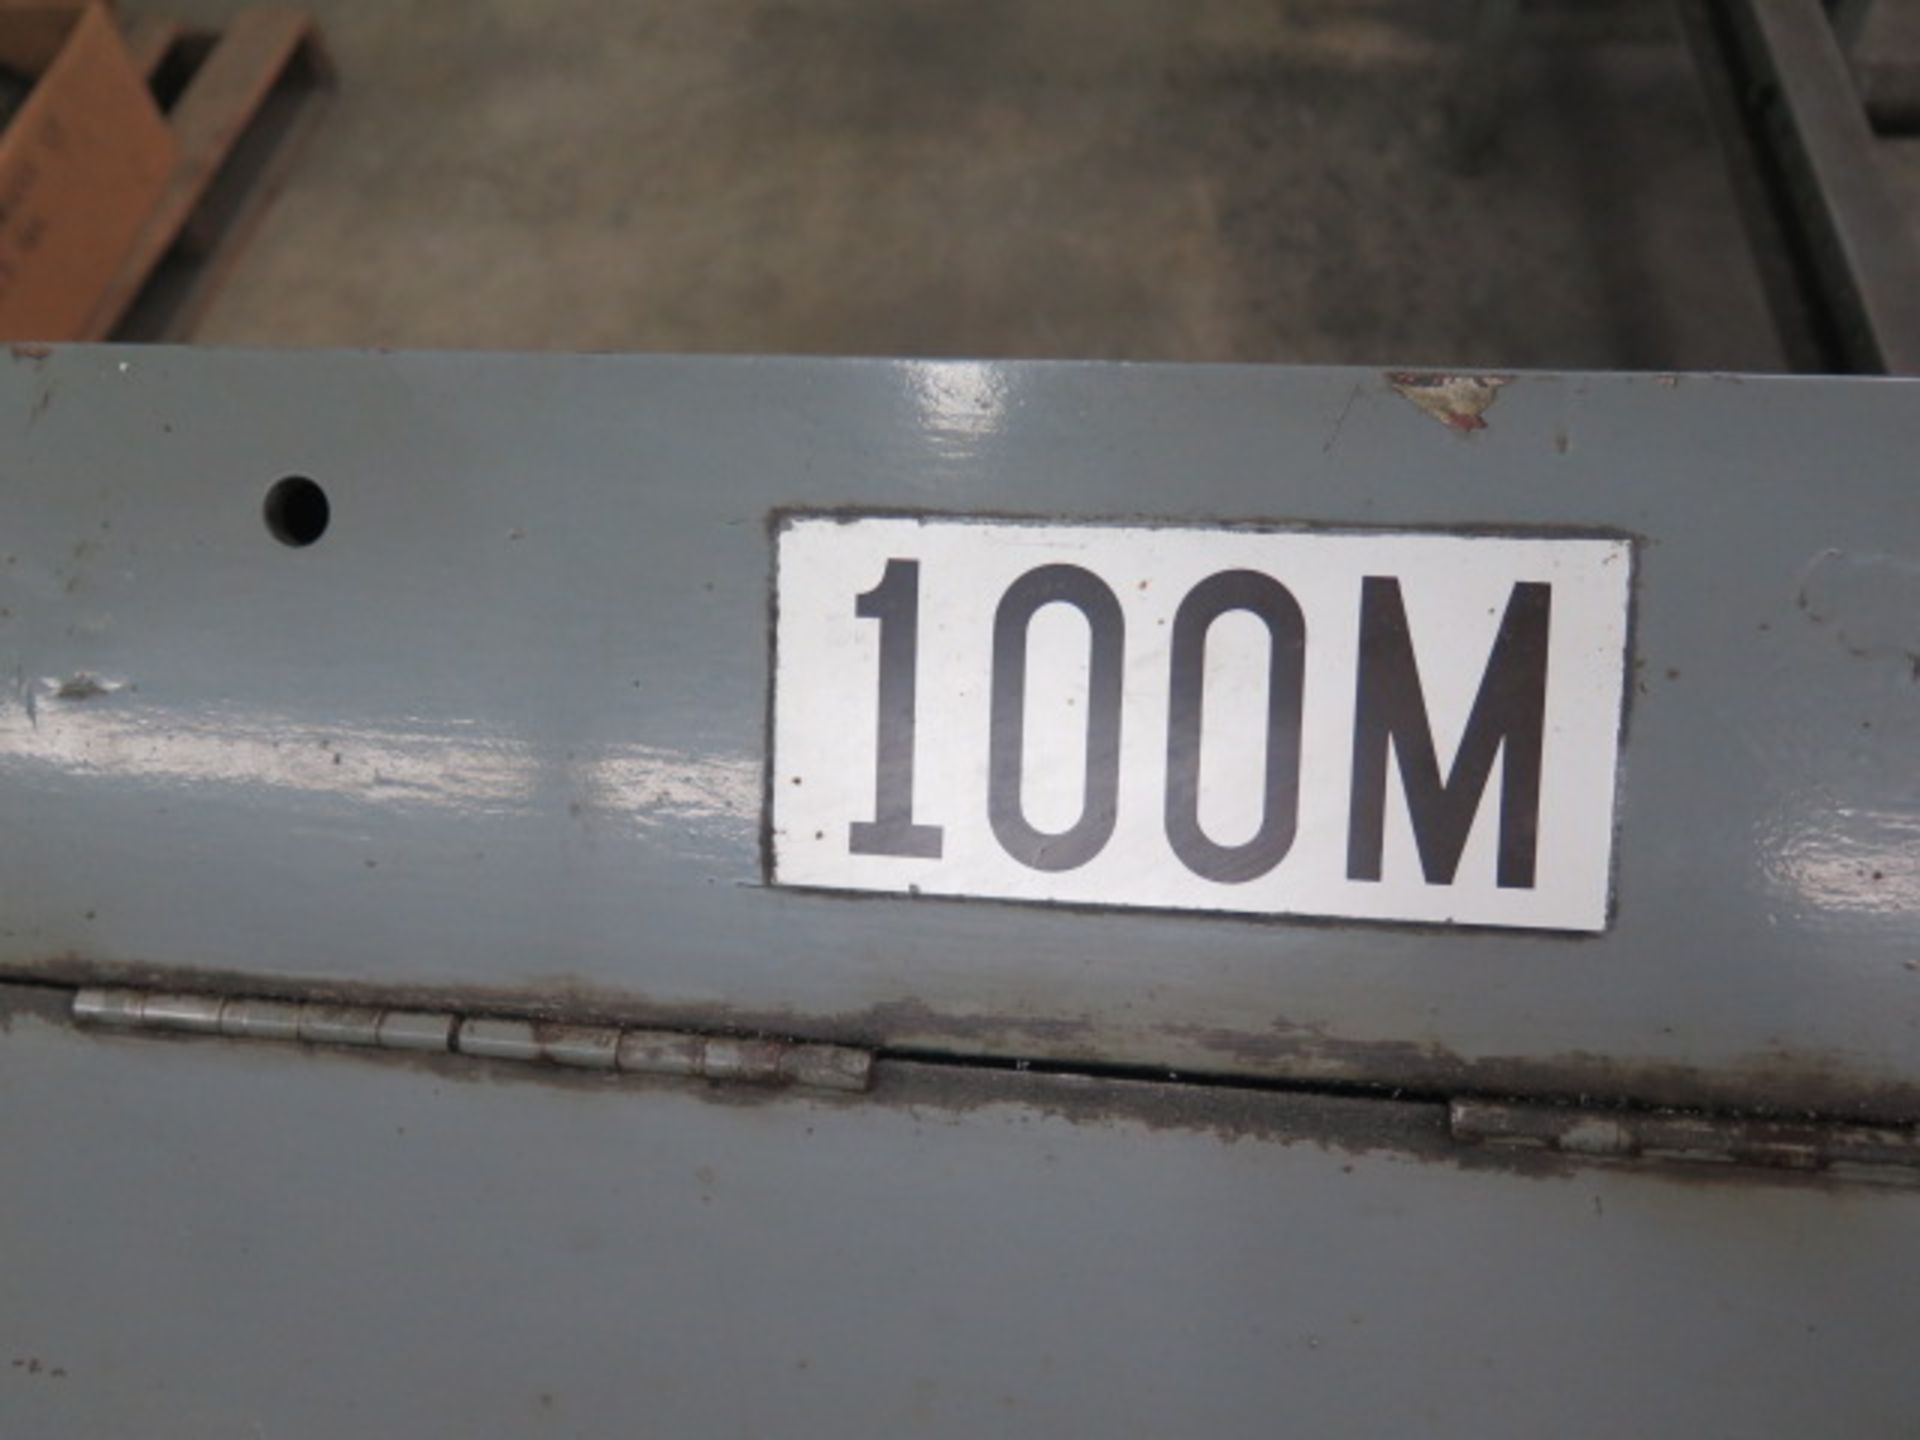 Continental mdl. 100M 10” Horizontal Band Saw w/ Manual Clamping, Stop, Coolant, Conveyor - Image 4 of 9